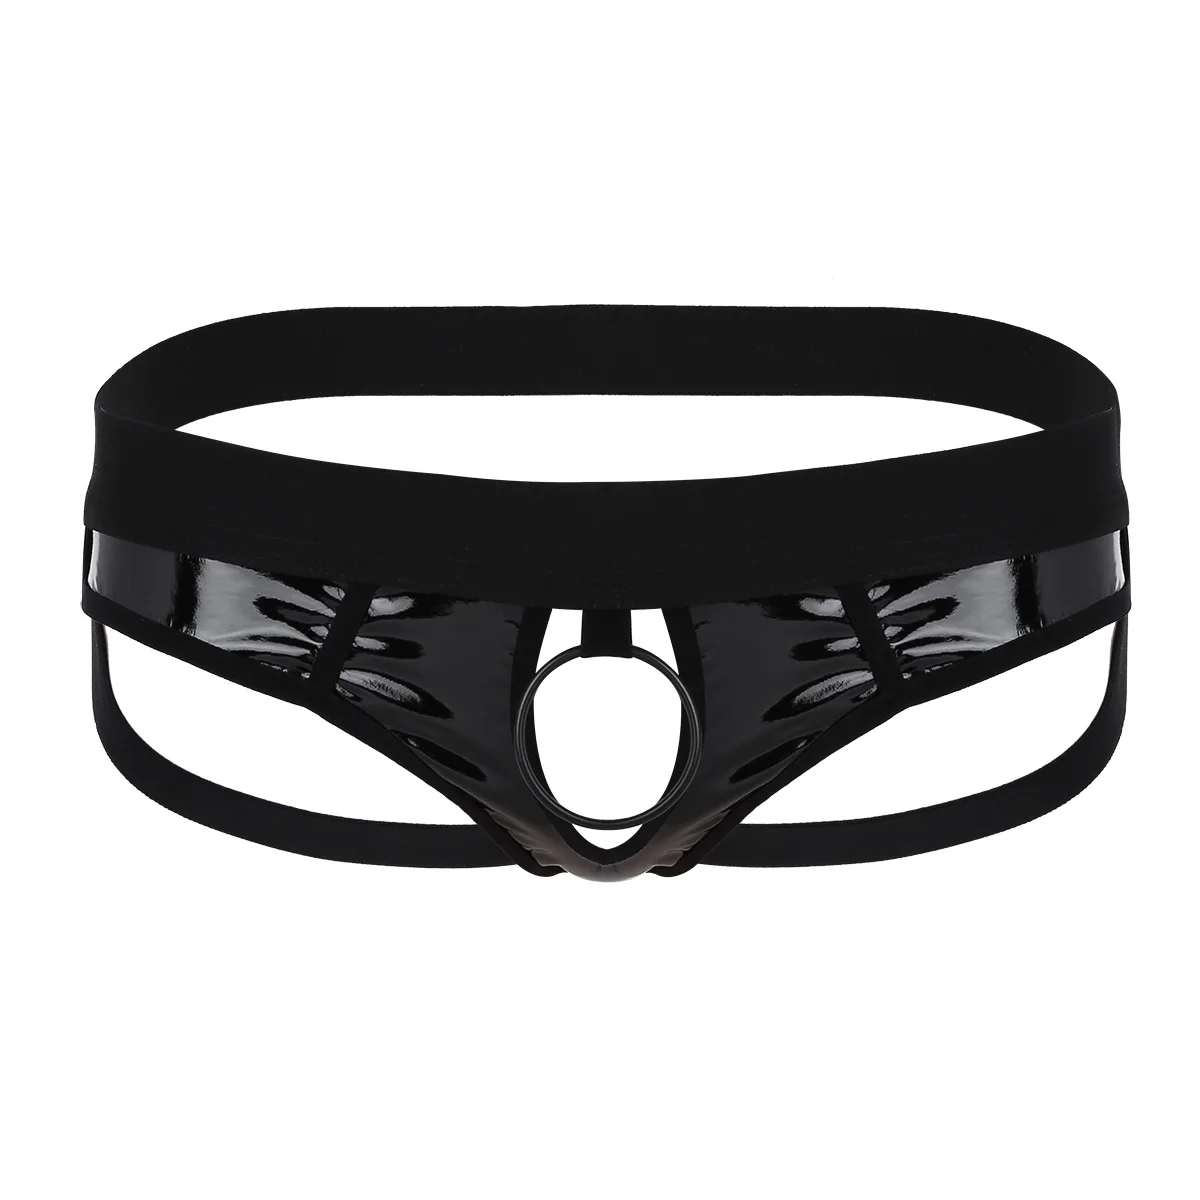 Mens Briefs Faux Leather Hollow Out Jockstrap Sexy G String Low Rise Thong Black Red Men Sexy